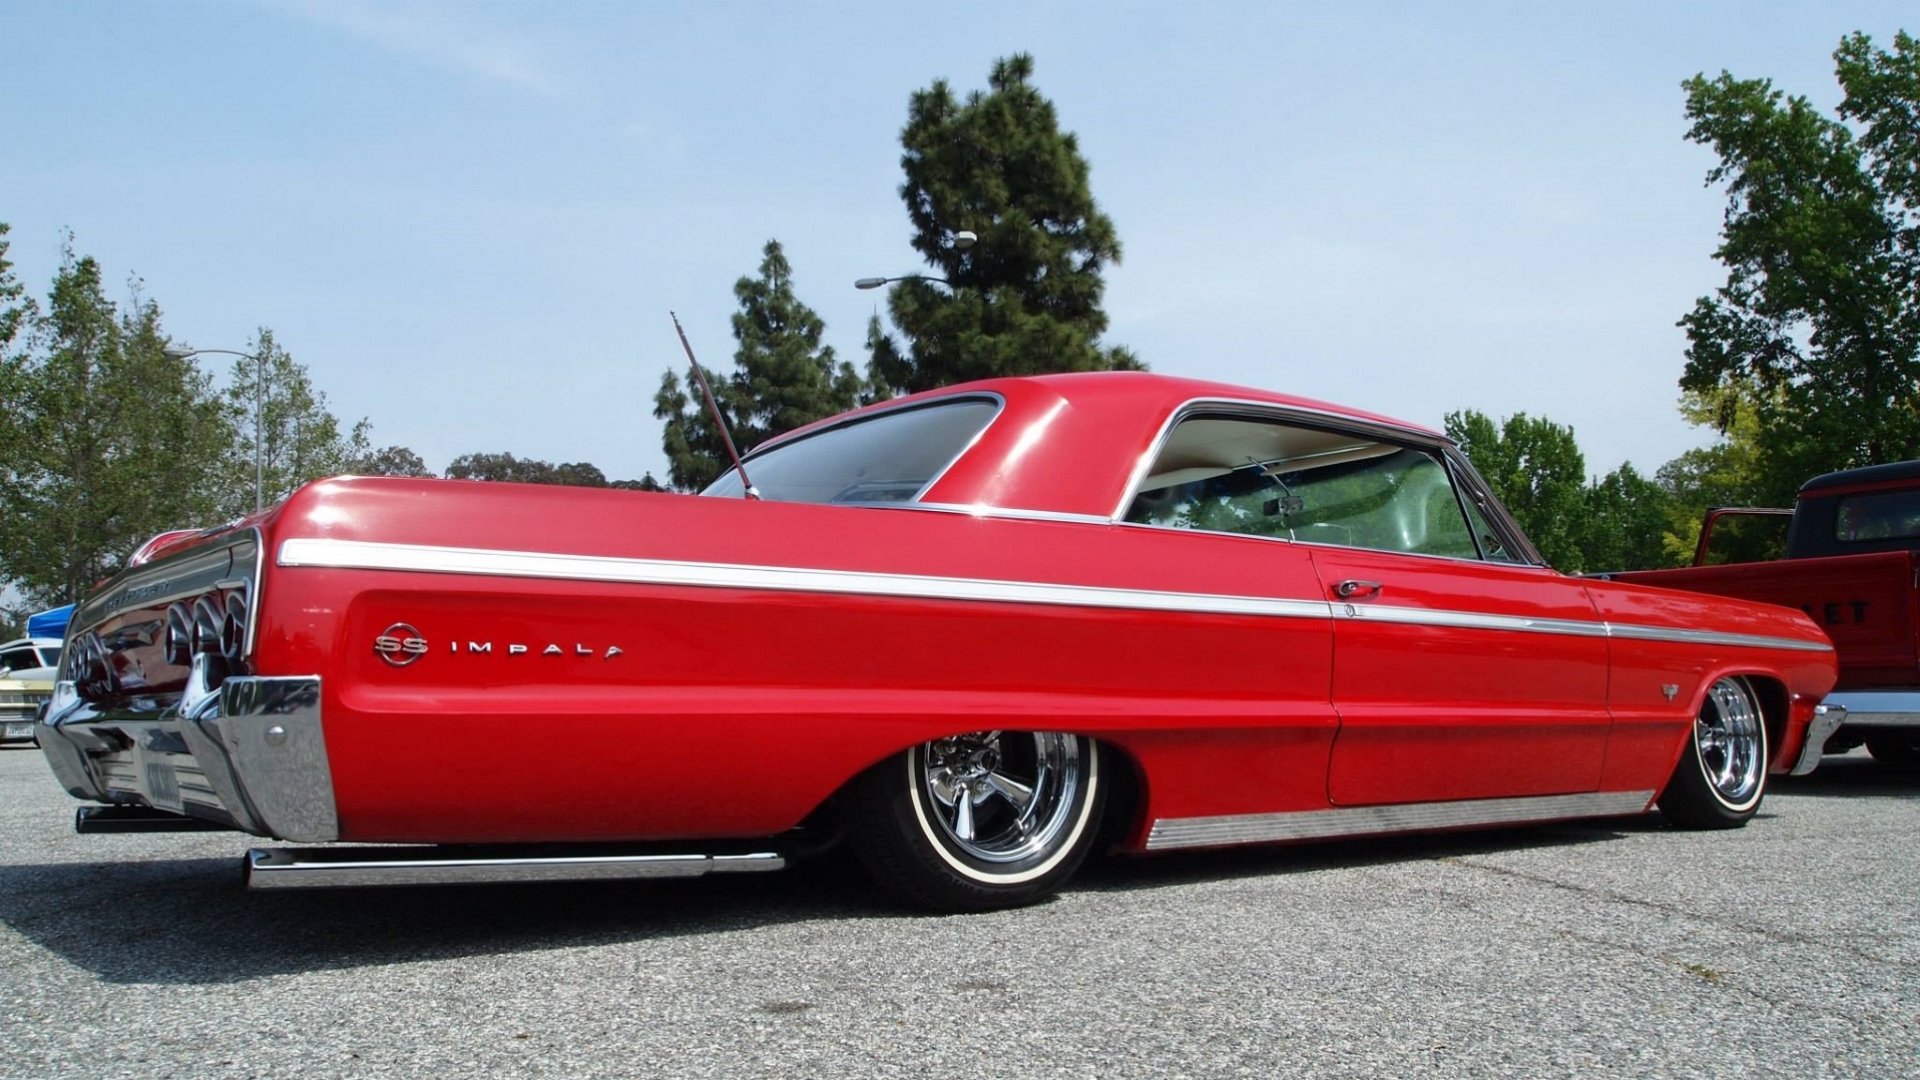 Awesome Chevrolet Impala free wallpaper ID:237621 for full hd 1920x1080 computer